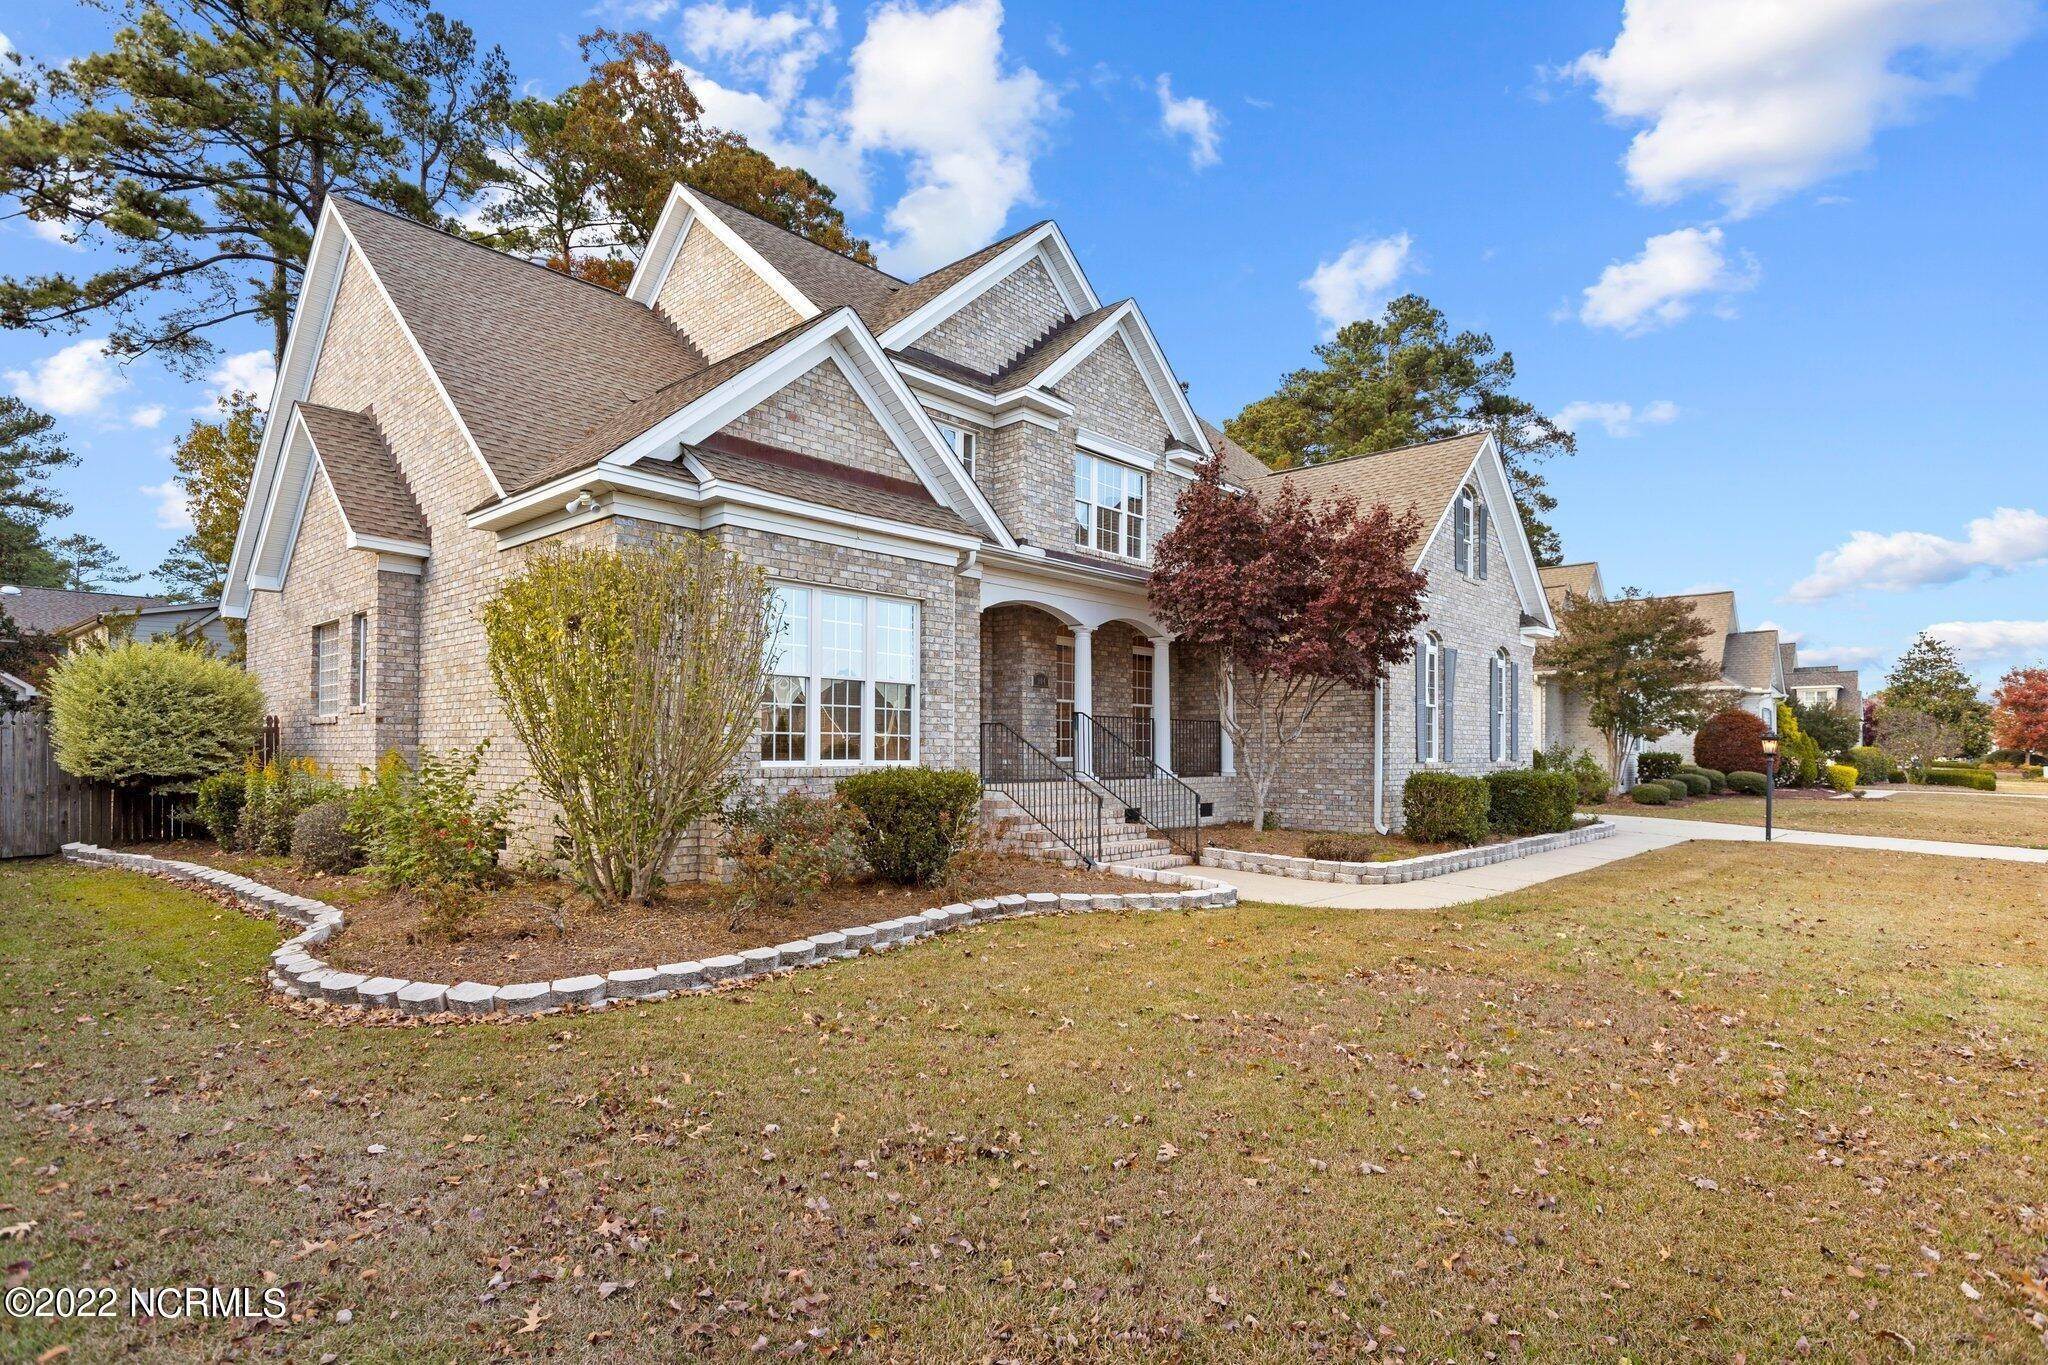 42. Single Family for Sale at Greenville, NC 27858